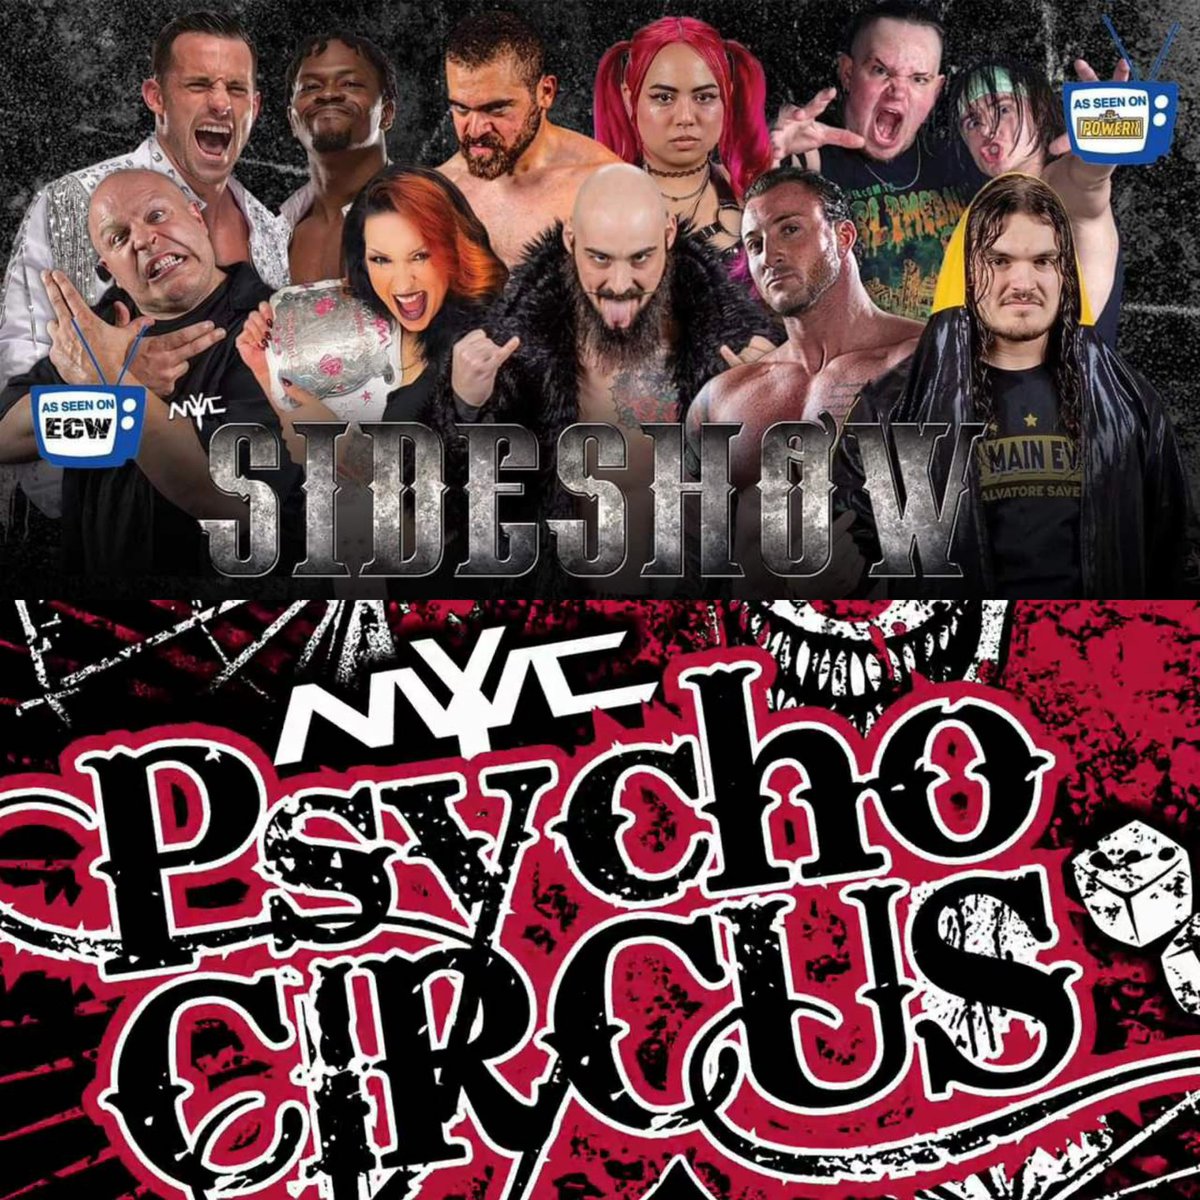 Sideshow is this Saturday night! Did you get your tickets yet? If you attend Sideshow, you will get first shot at Psycho Circus tickets for next month, and we all know Psycho Circus tickets go fast! nywcwrestling.com for tickets and info! #wwe #WWERaw #aew #prowrestling